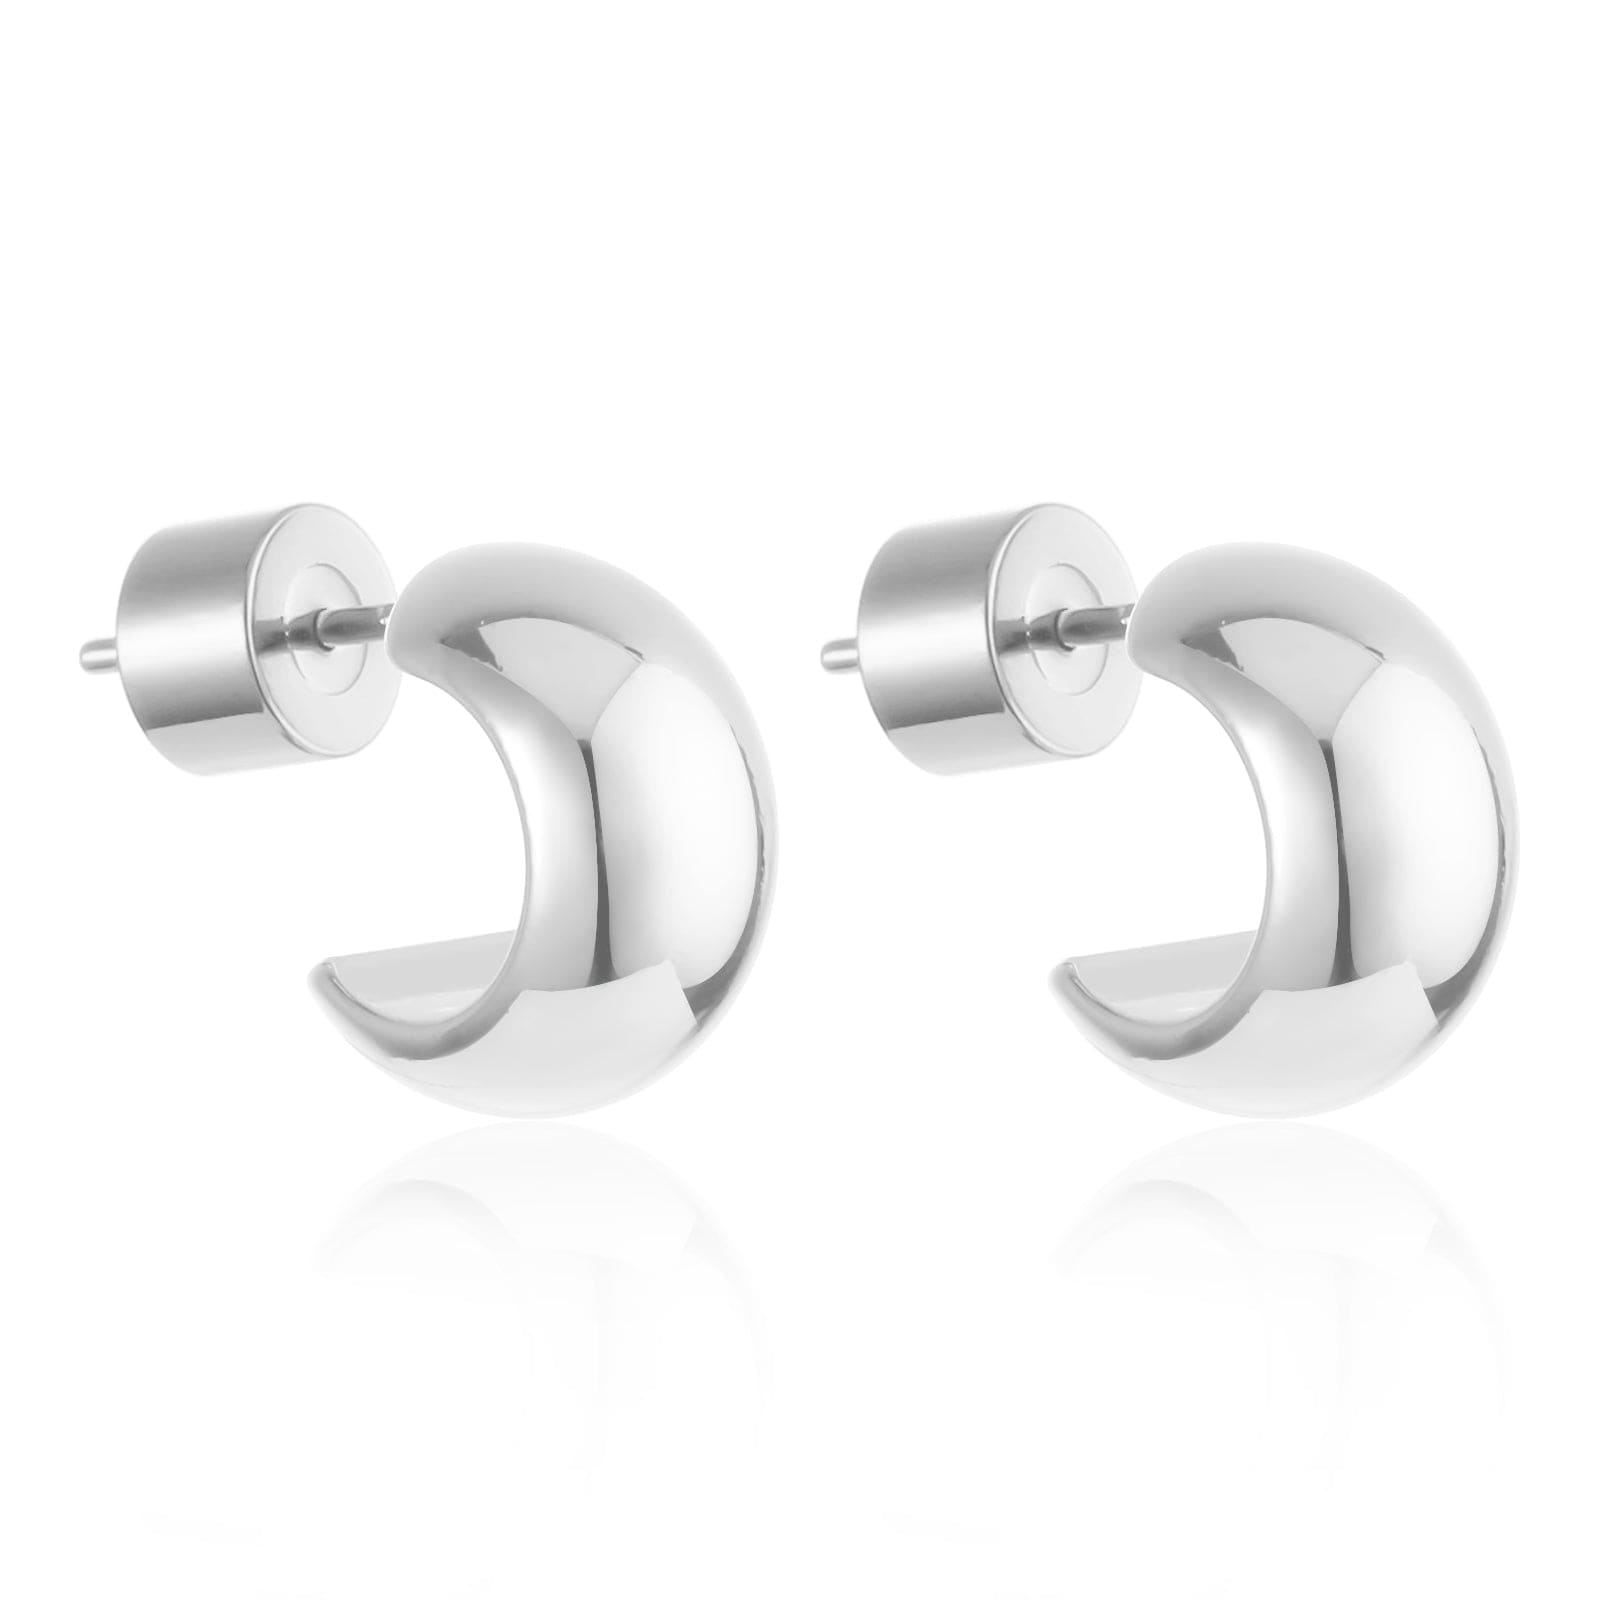 Two sterling silver Nice Hoop earrings are displayed against a white background, calling attention to the open hoop design, sleek outter curve, and cylindrical push-back closure.